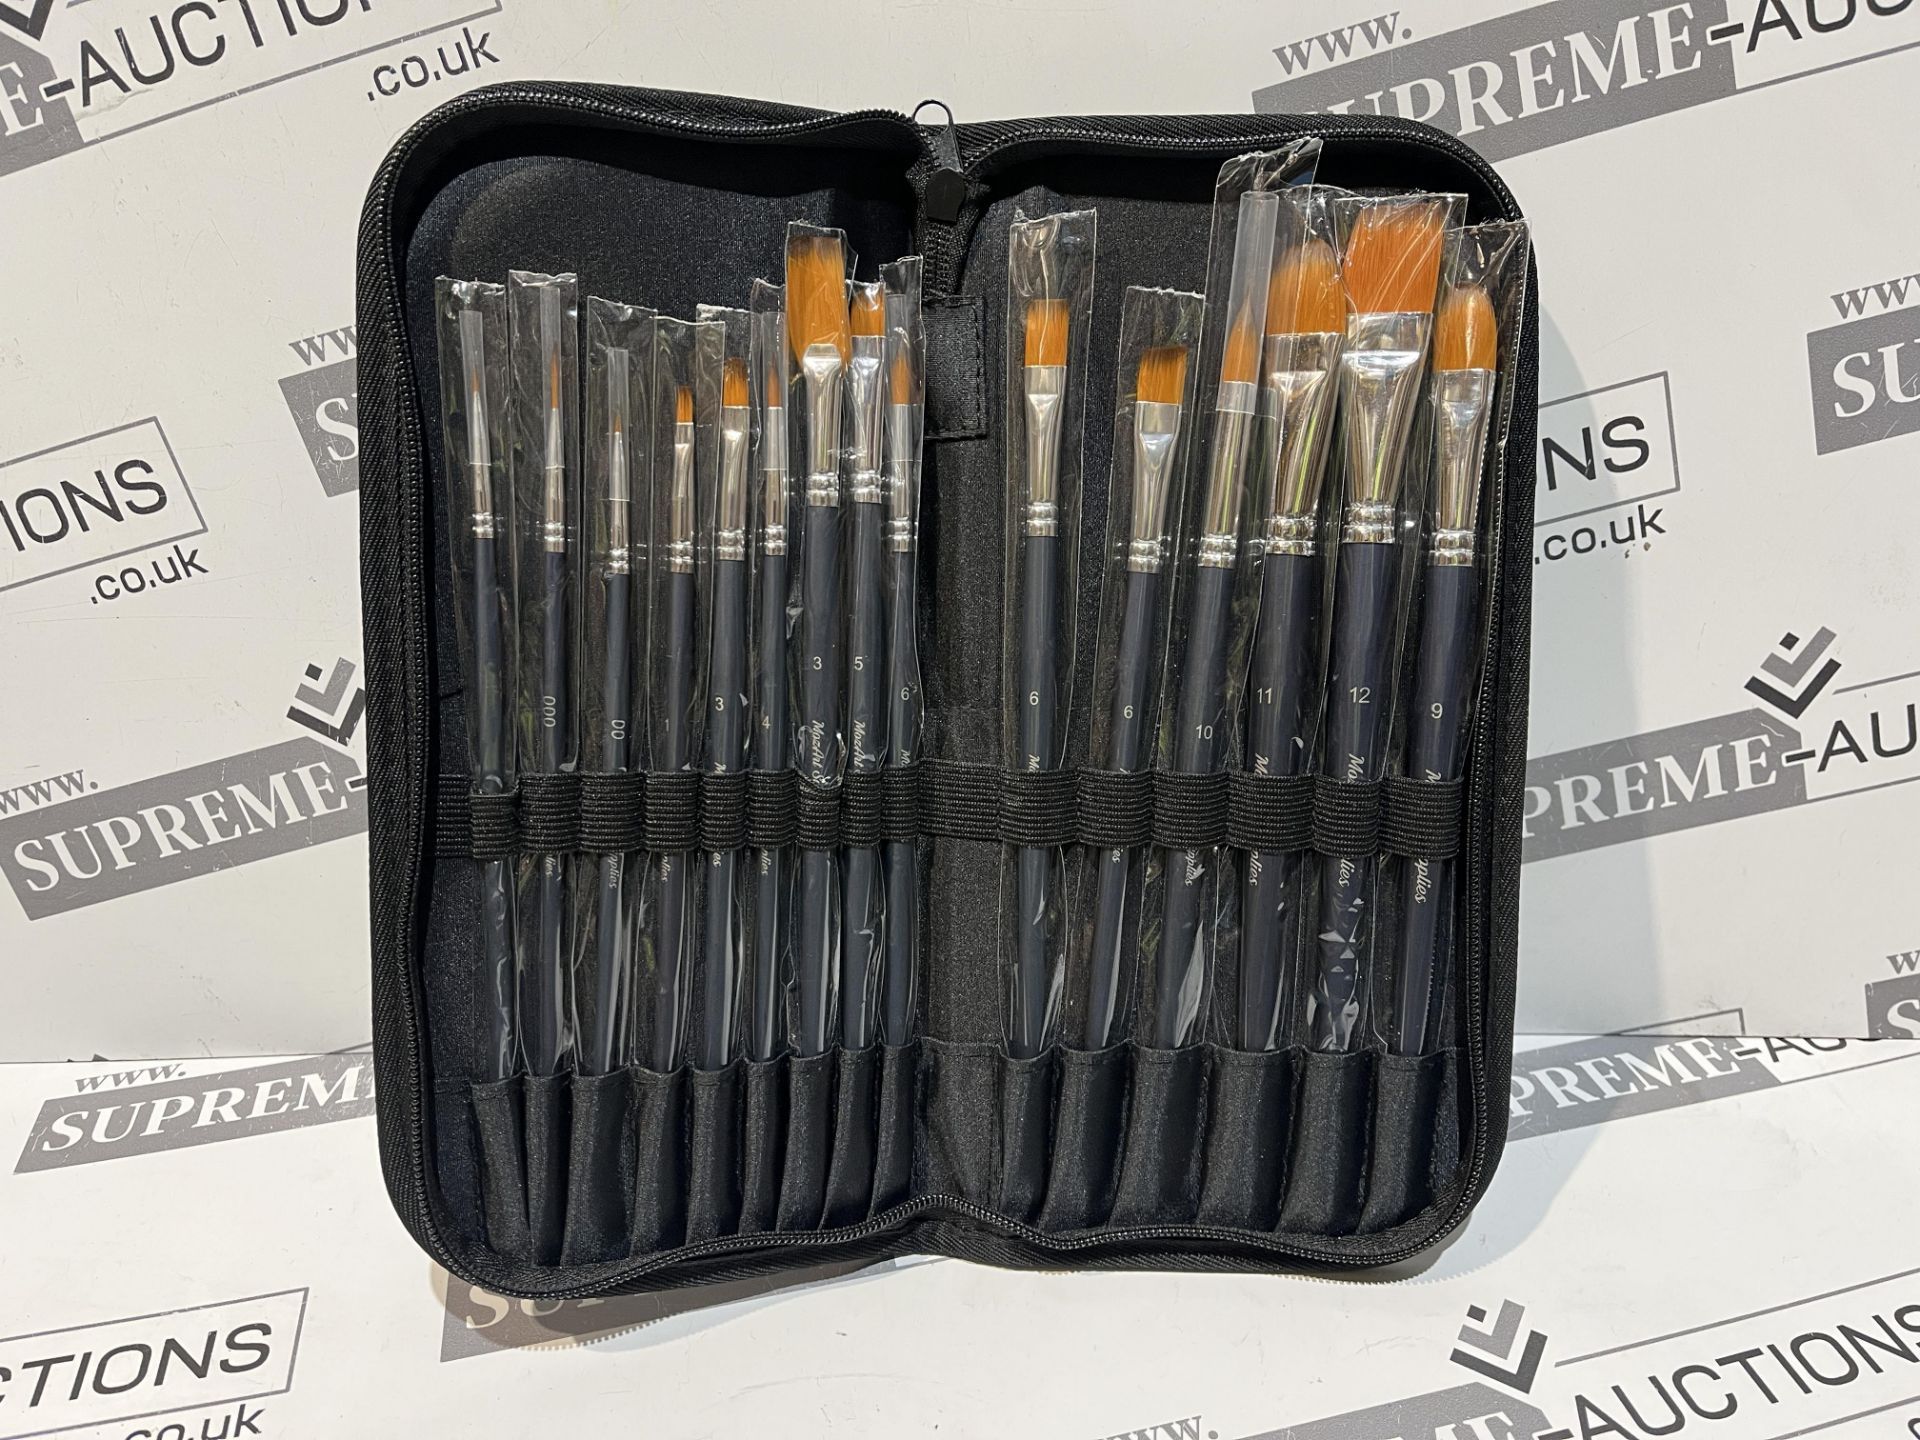 20 X BRAND NEW MOZART 15 PIECE WATERCOLOUR PAINTBRUSH SETS IN CARRY CASE R18-3